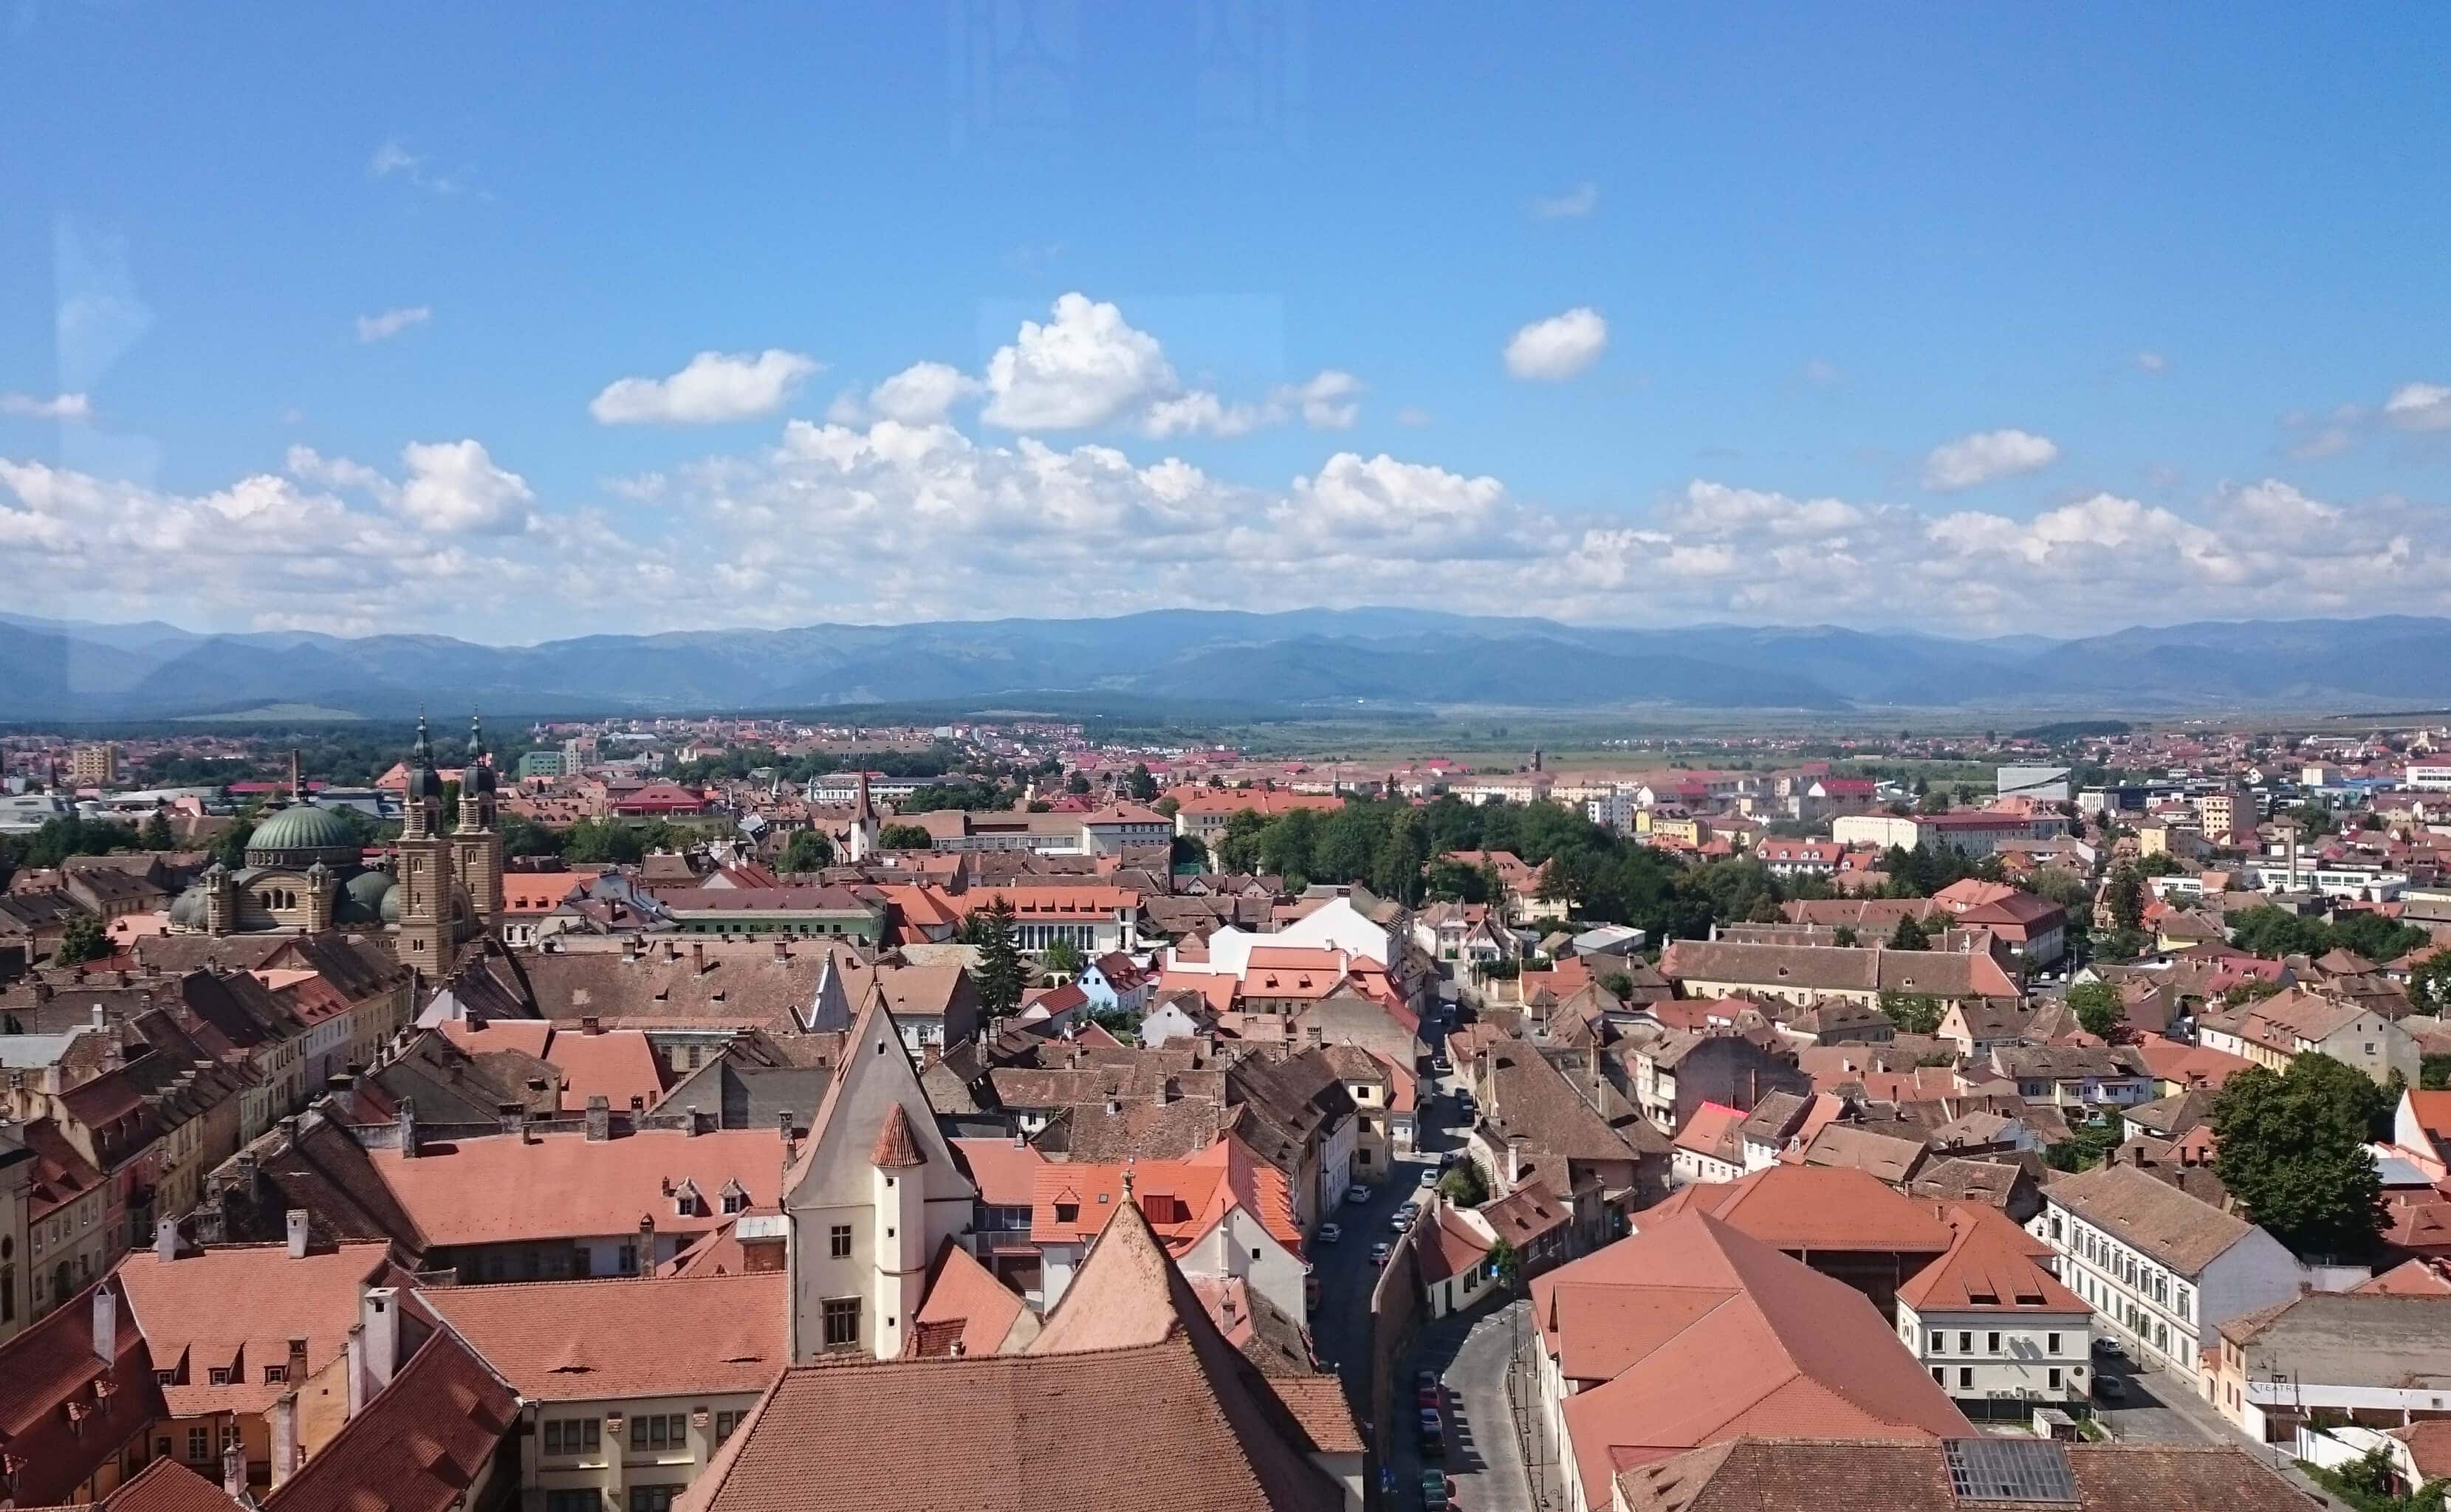 Sibiu, Romania - One of the most underrated cities in the world + why you should add it to your bucket list low!